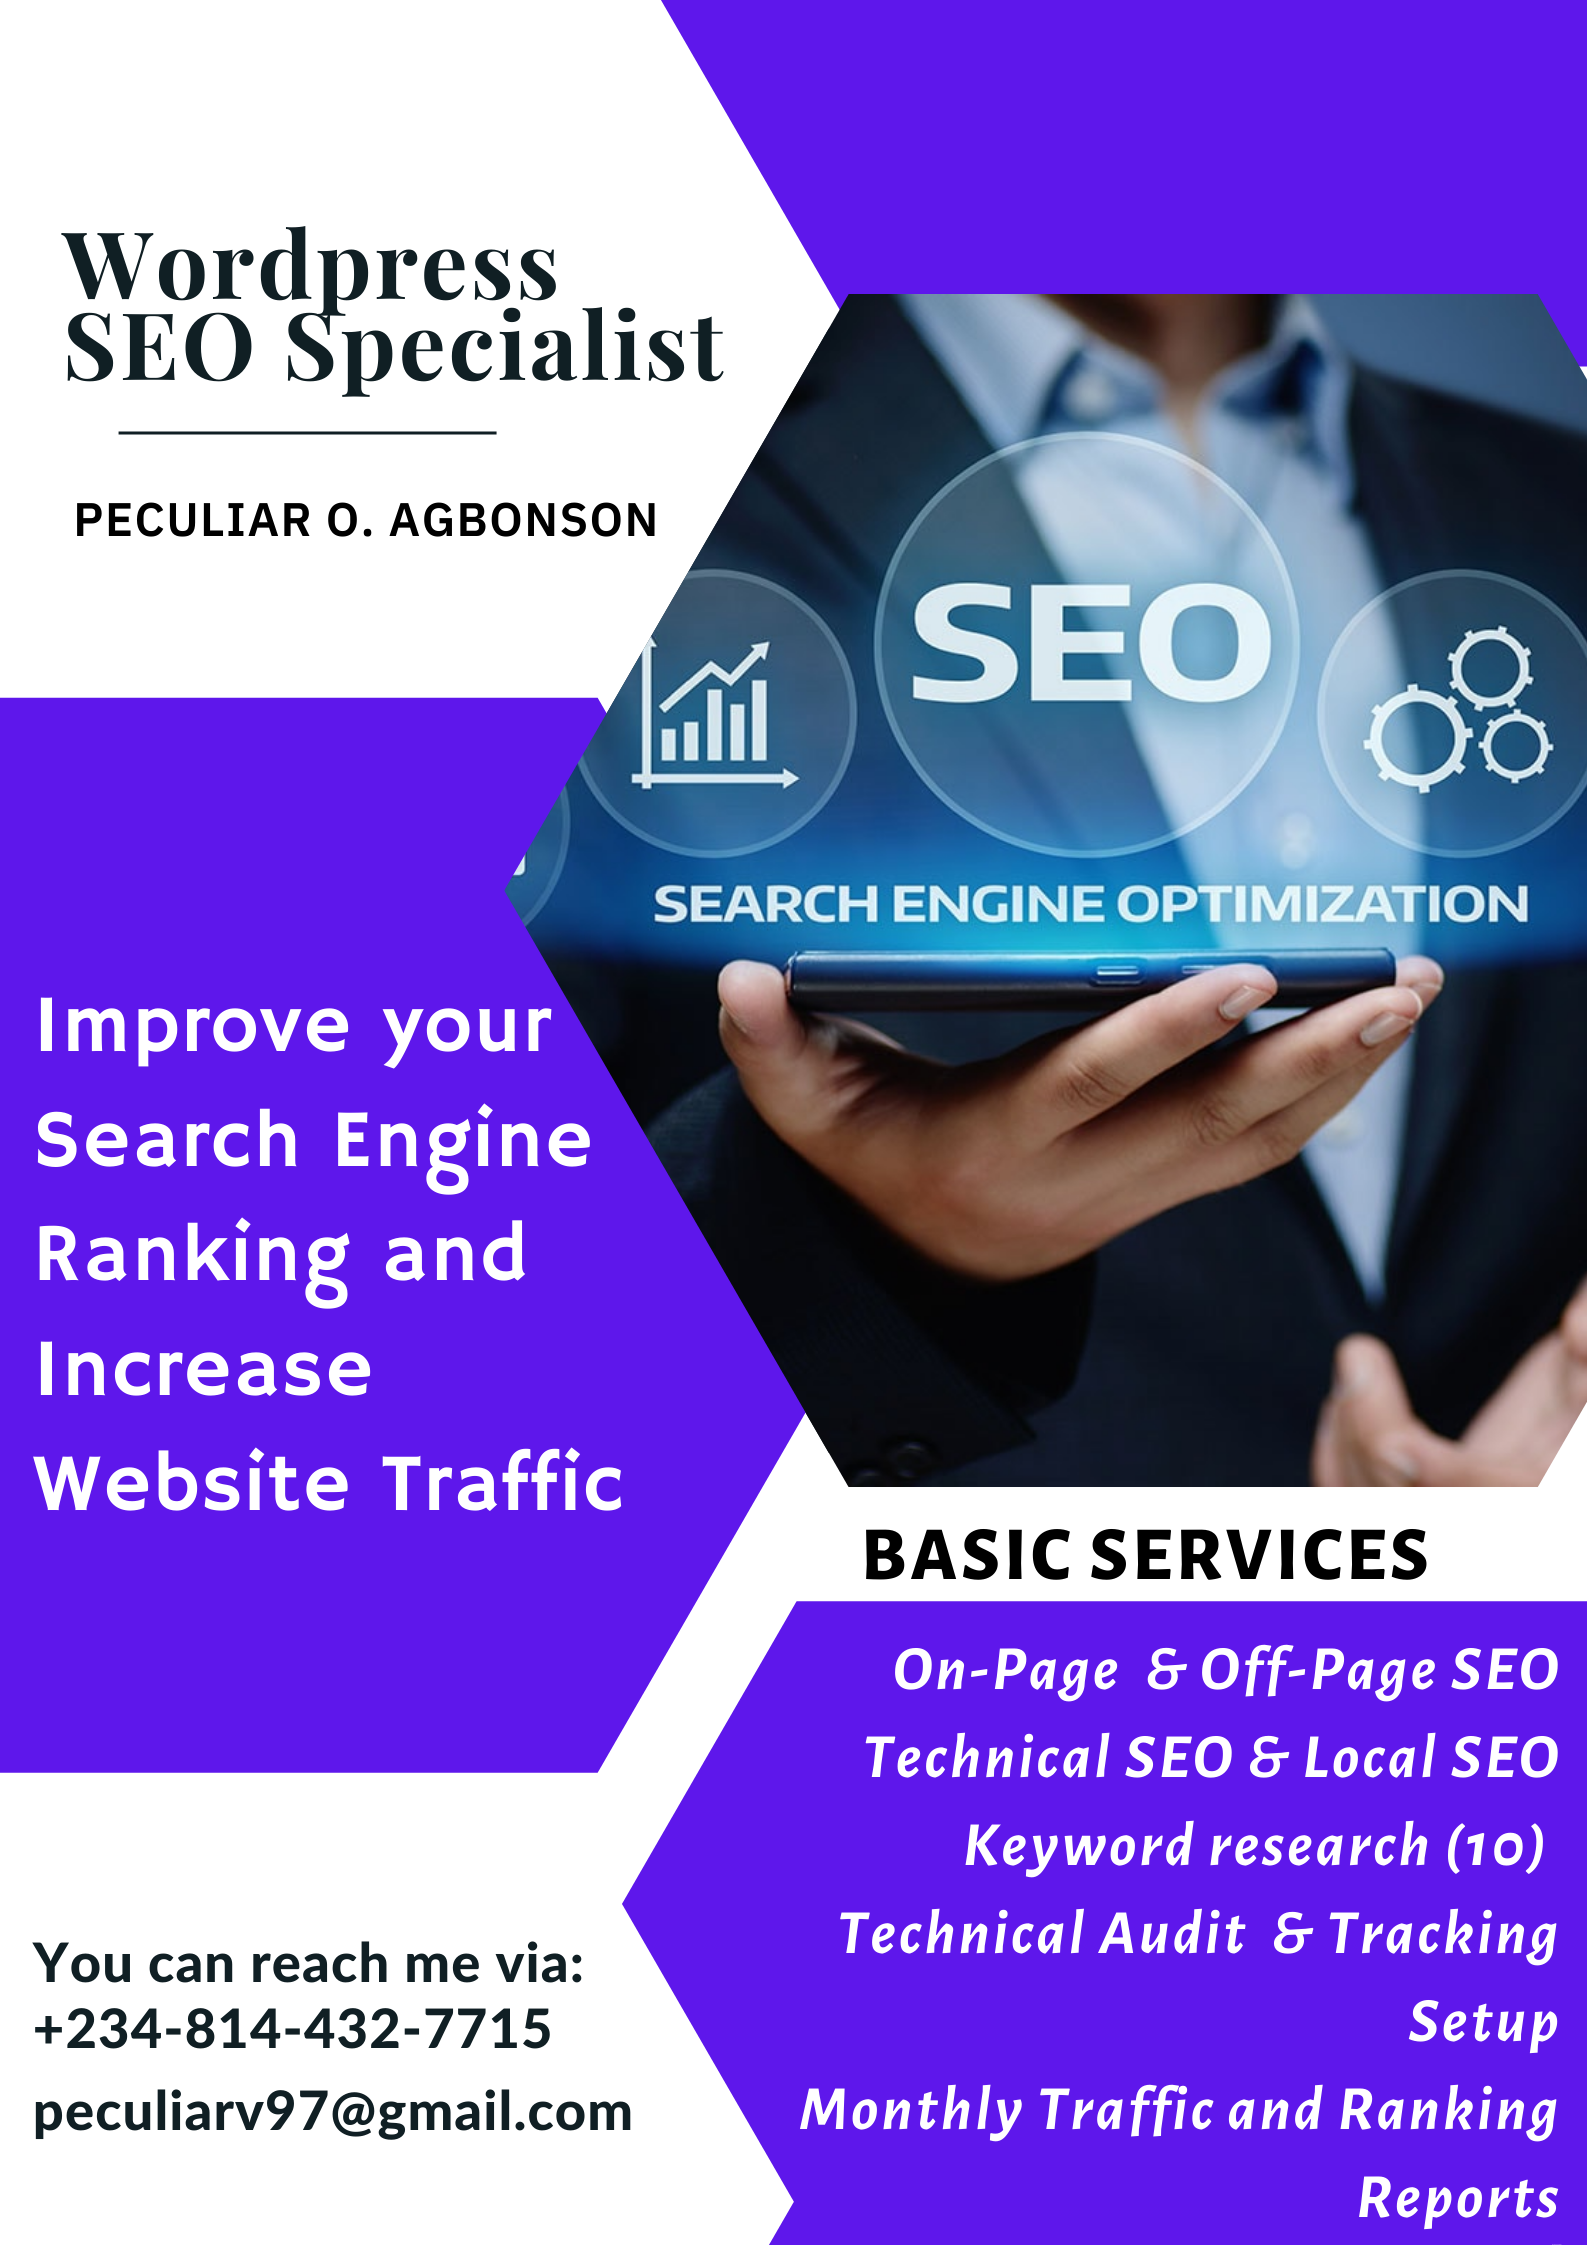 I can masterfully improve your blogs/website contents with Search Engine Optimized keywords that will effectively increase your organic discovery and high quality website traffic.